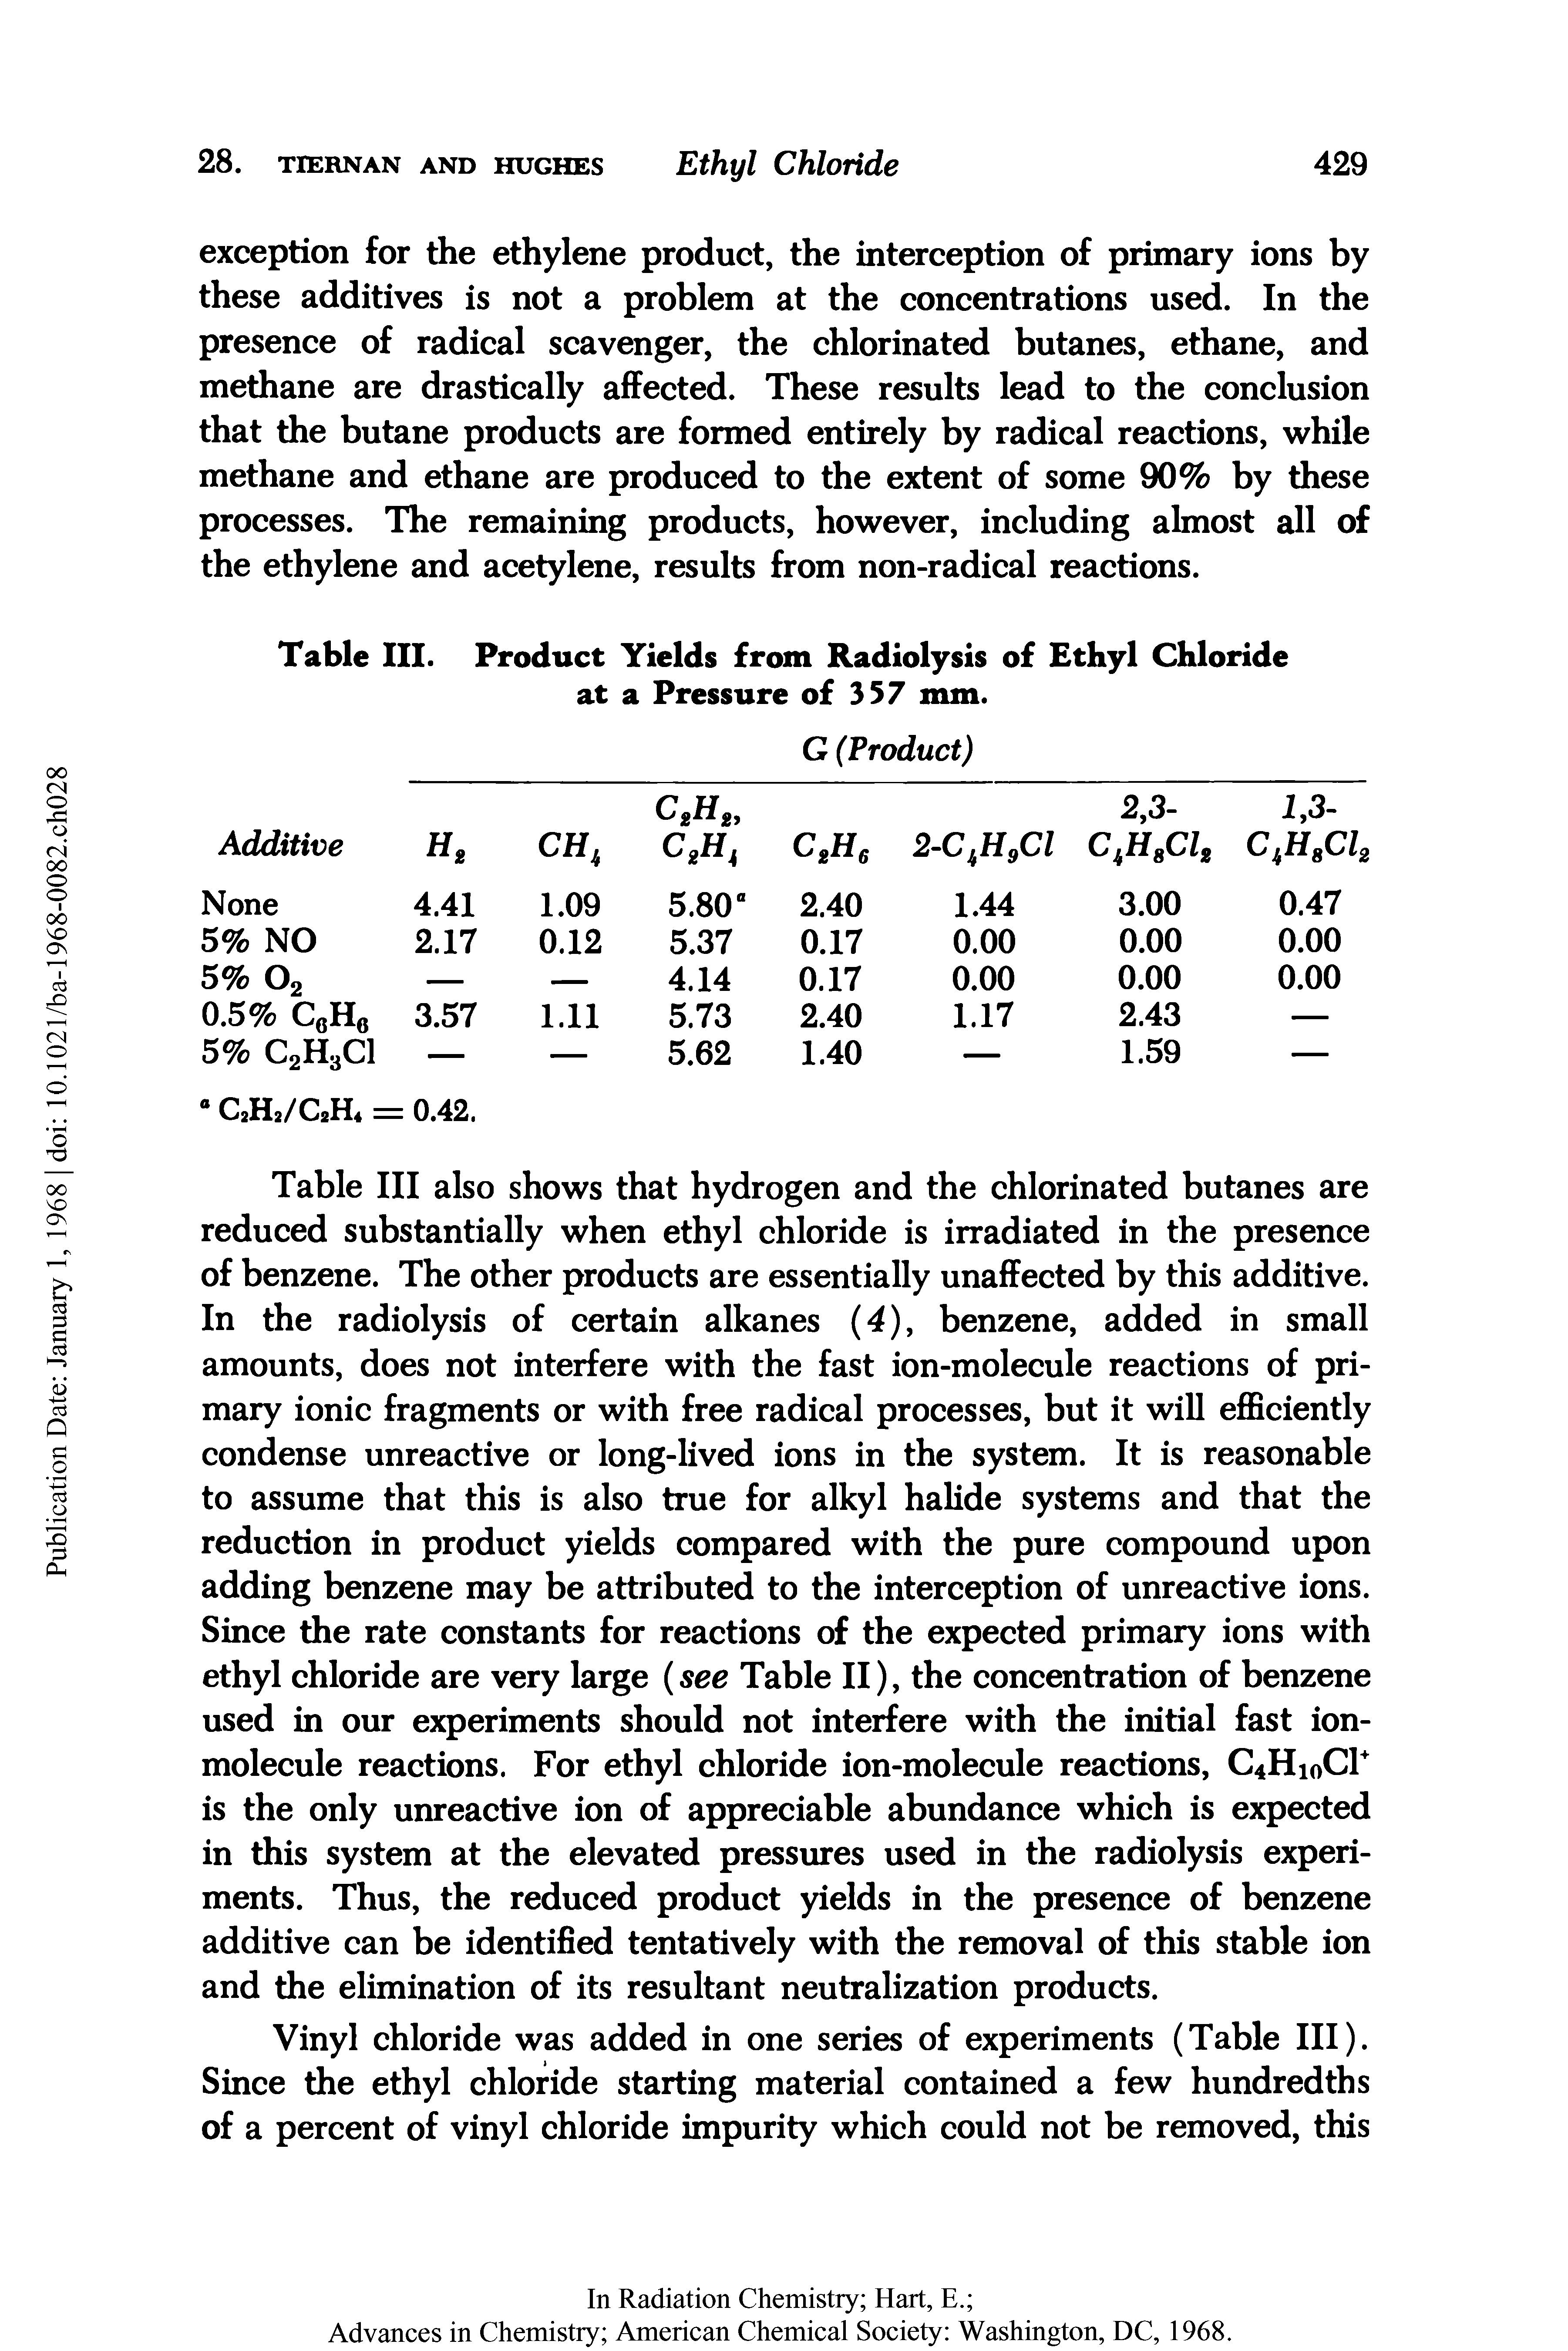 Table III also shows that hydrogen and the chlorinated butanes are reduced substantially when ethyl chloride is irradiated in the presence of benzene. The other products are essentially unaffected by this additive. In the radiolysis of certain alkanes (4), benzene, added in small amounts, does not interfere with the fast ion-molecule reactions of primary ionic fragments or with free radical processes, but it will efficiently condense unreactive or long-lived ions in the system. It is reasonable to assume that this is also true for alkyl halide systems and that the reduction in product yields compared with the pure compound upon adding benzene may be attributed to the interception of unreactive ions. Since the rate constants for reactions of the expected primary ions with ethyl chloride are very large (see Table II), the concentration of benzene used in our experiments should not interfere with the initial fast ion-molecule reactions. For ethyl chloride ion-molecule reactions, C4Hi0C1+ is the only unreactive ion of appreciable abundance which is expected in this system at the elevated pressures used in the radiolysis experiments. Thus, the reduced product yields in the presence of benzene additive can be identified tentatively with the removal of this stable ion and the elimination of its resultant neutralization products.